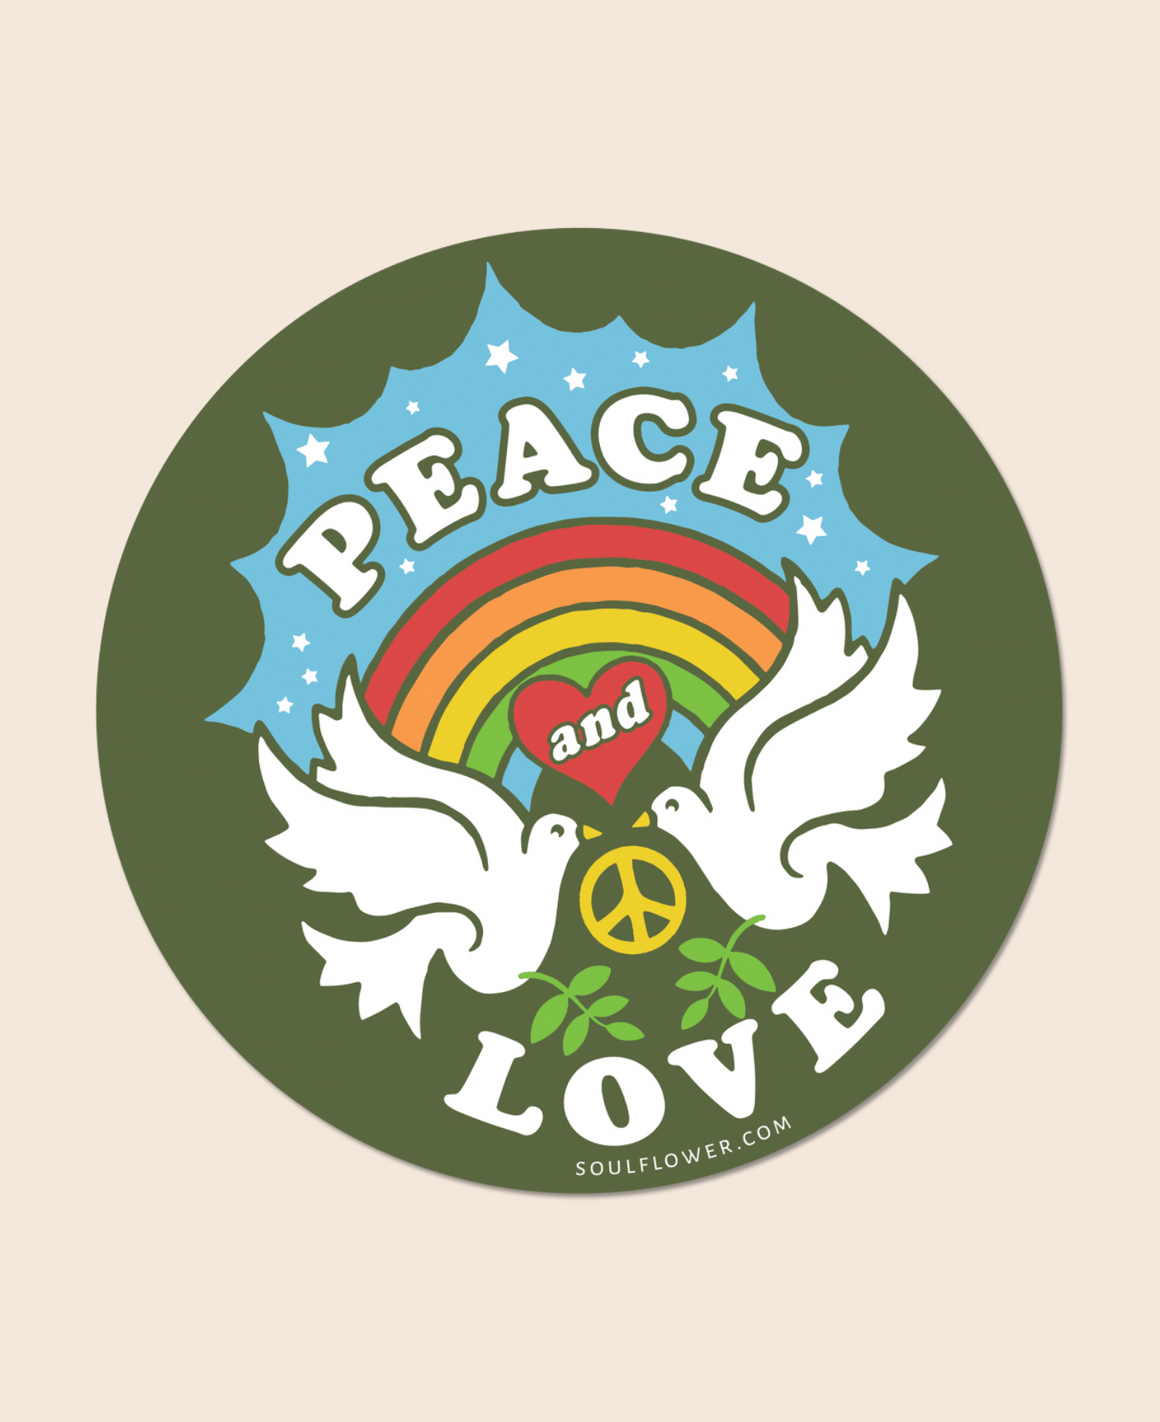 Peace and Love Sticker